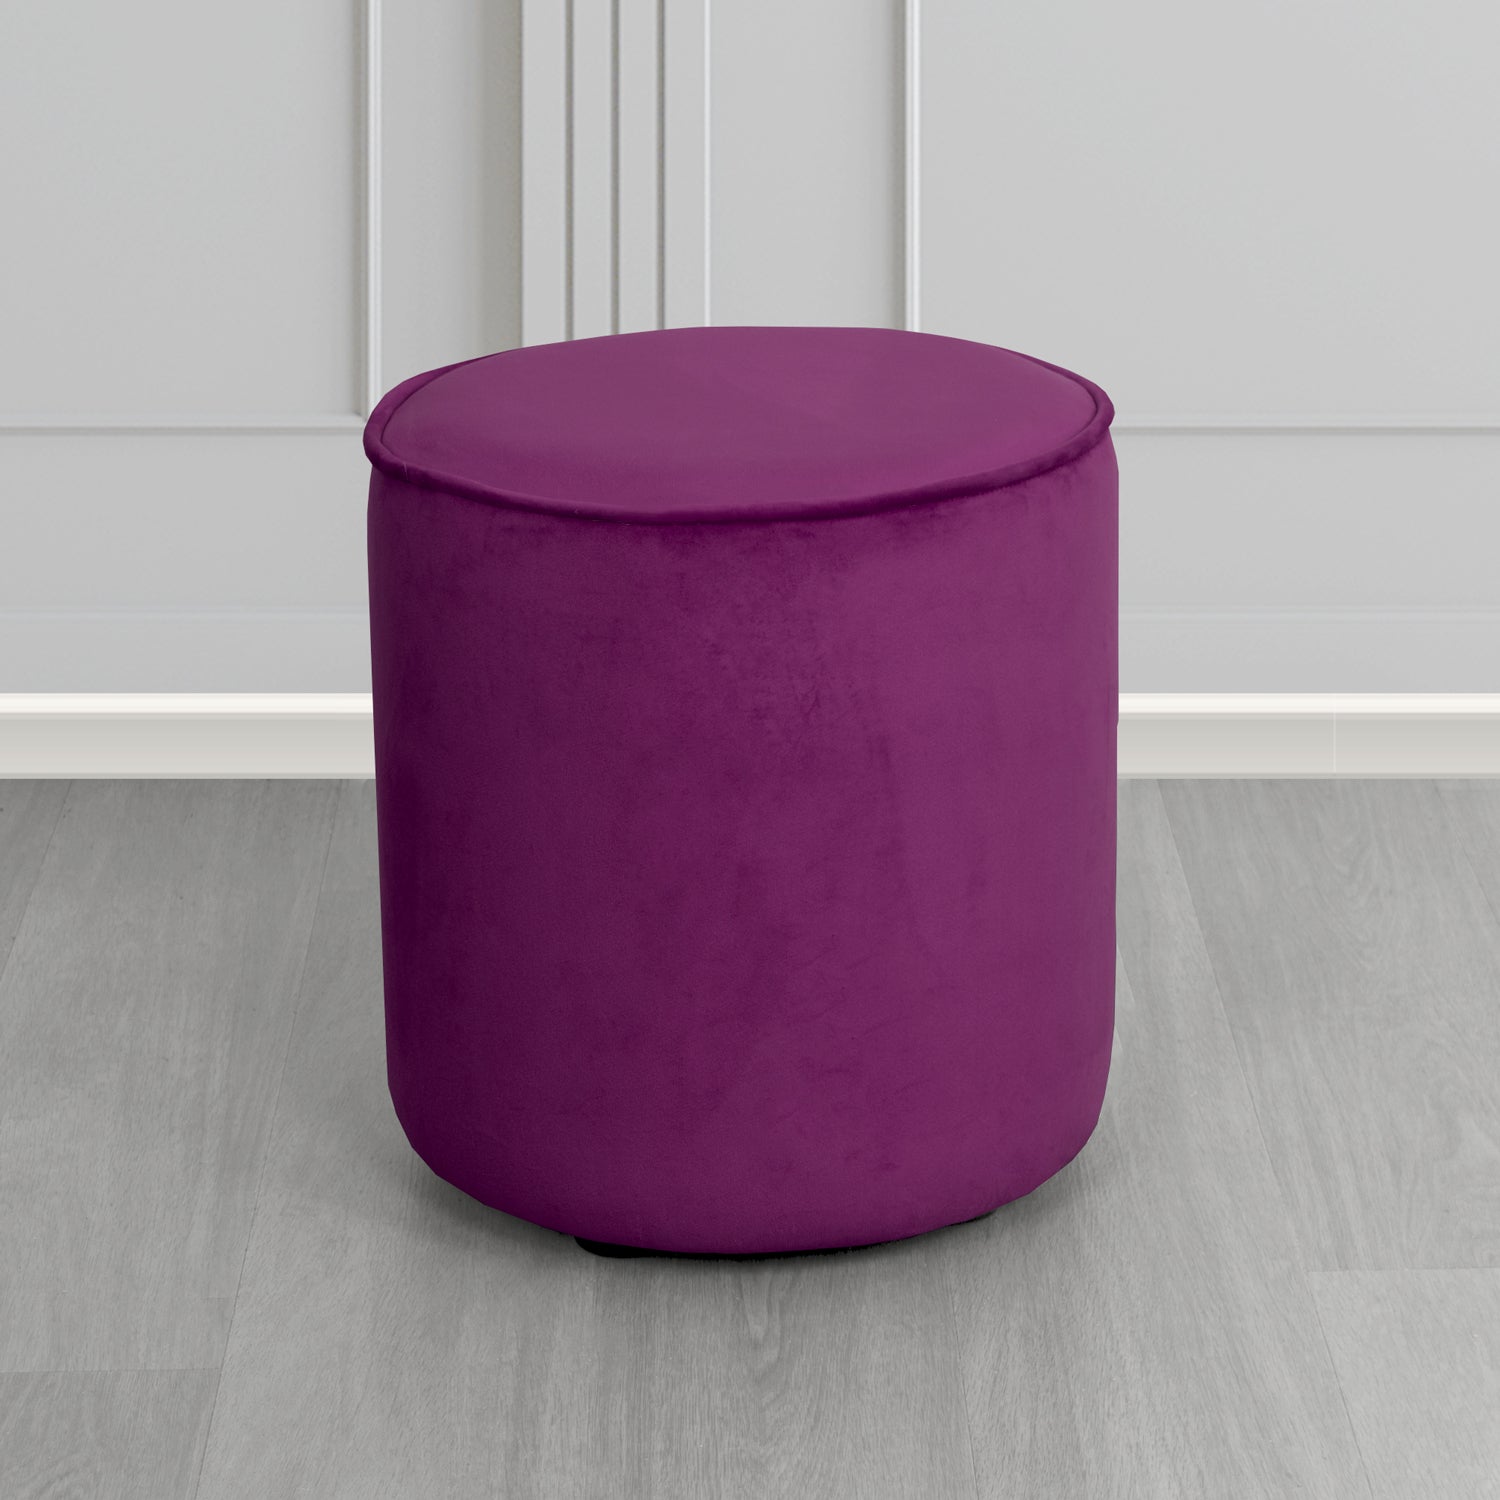 Betsy Round Footstool in Monaco Amethyst Velvet Fabric - The Tub Chair Shop